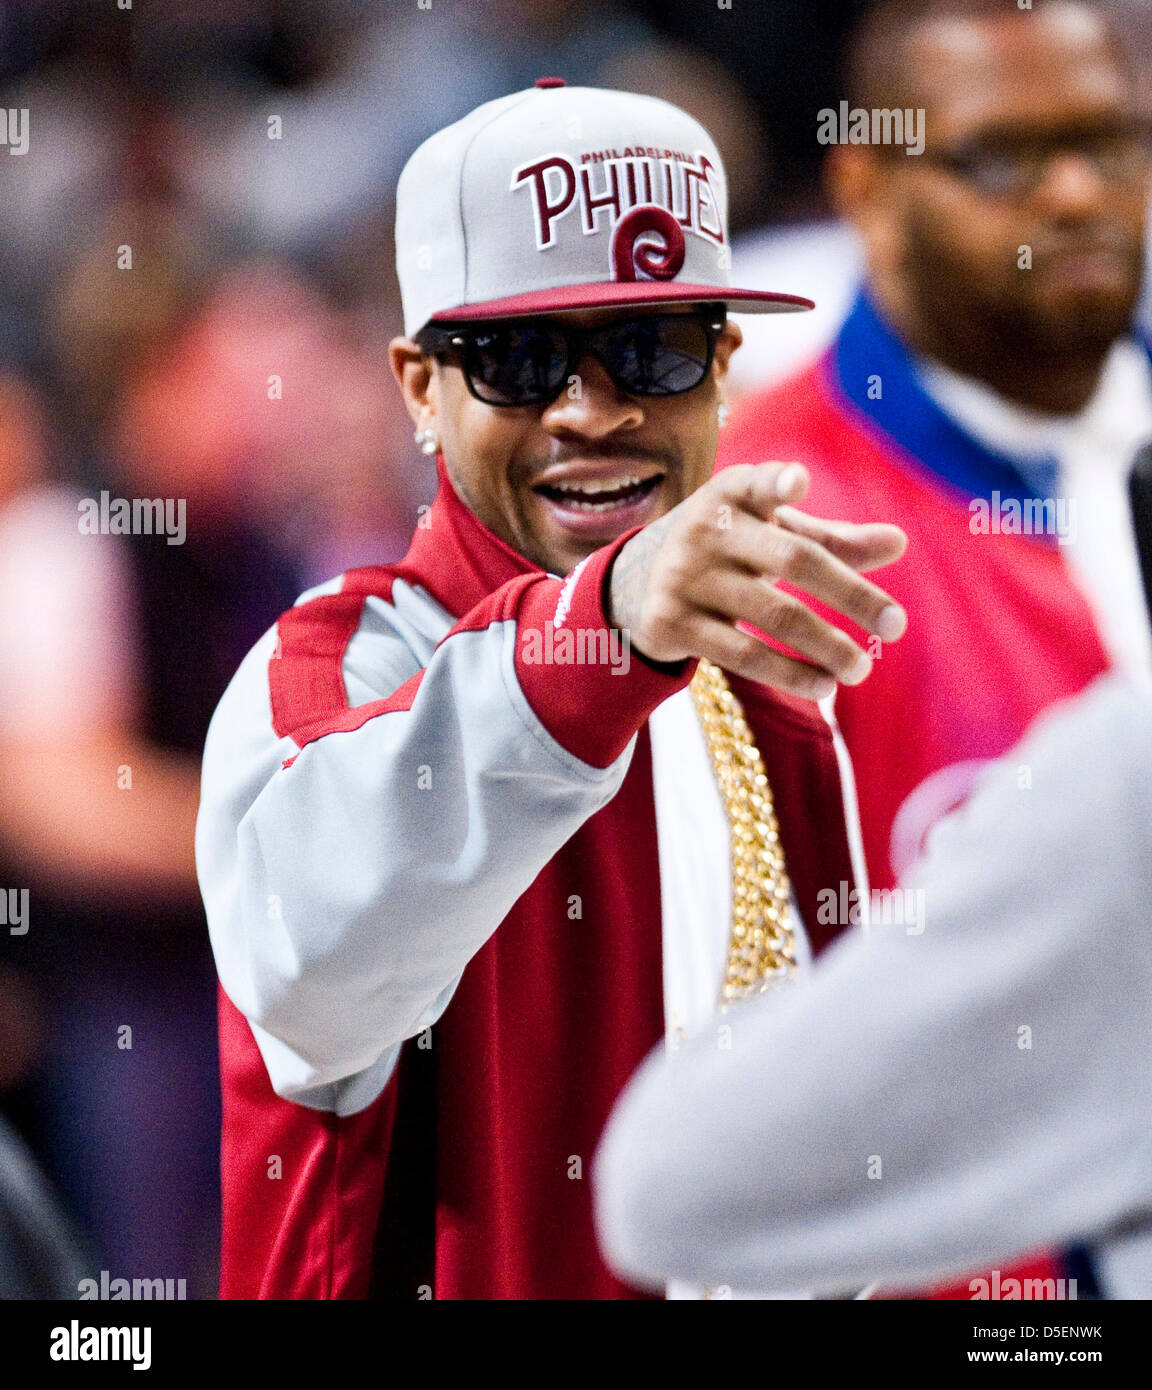 Philadelphia, Pennsylvania, USA. 30th March, 2013. 76ers' legendary guard Allen Iverson was in attendance during NBA action between the Charlotte Bobcats and Philadelphia 76ers at Wells Fargo Ce]nter in Philadelphia, Pennsylvania. The 76ers defeated the Bobcats !00-92. Stock Photo